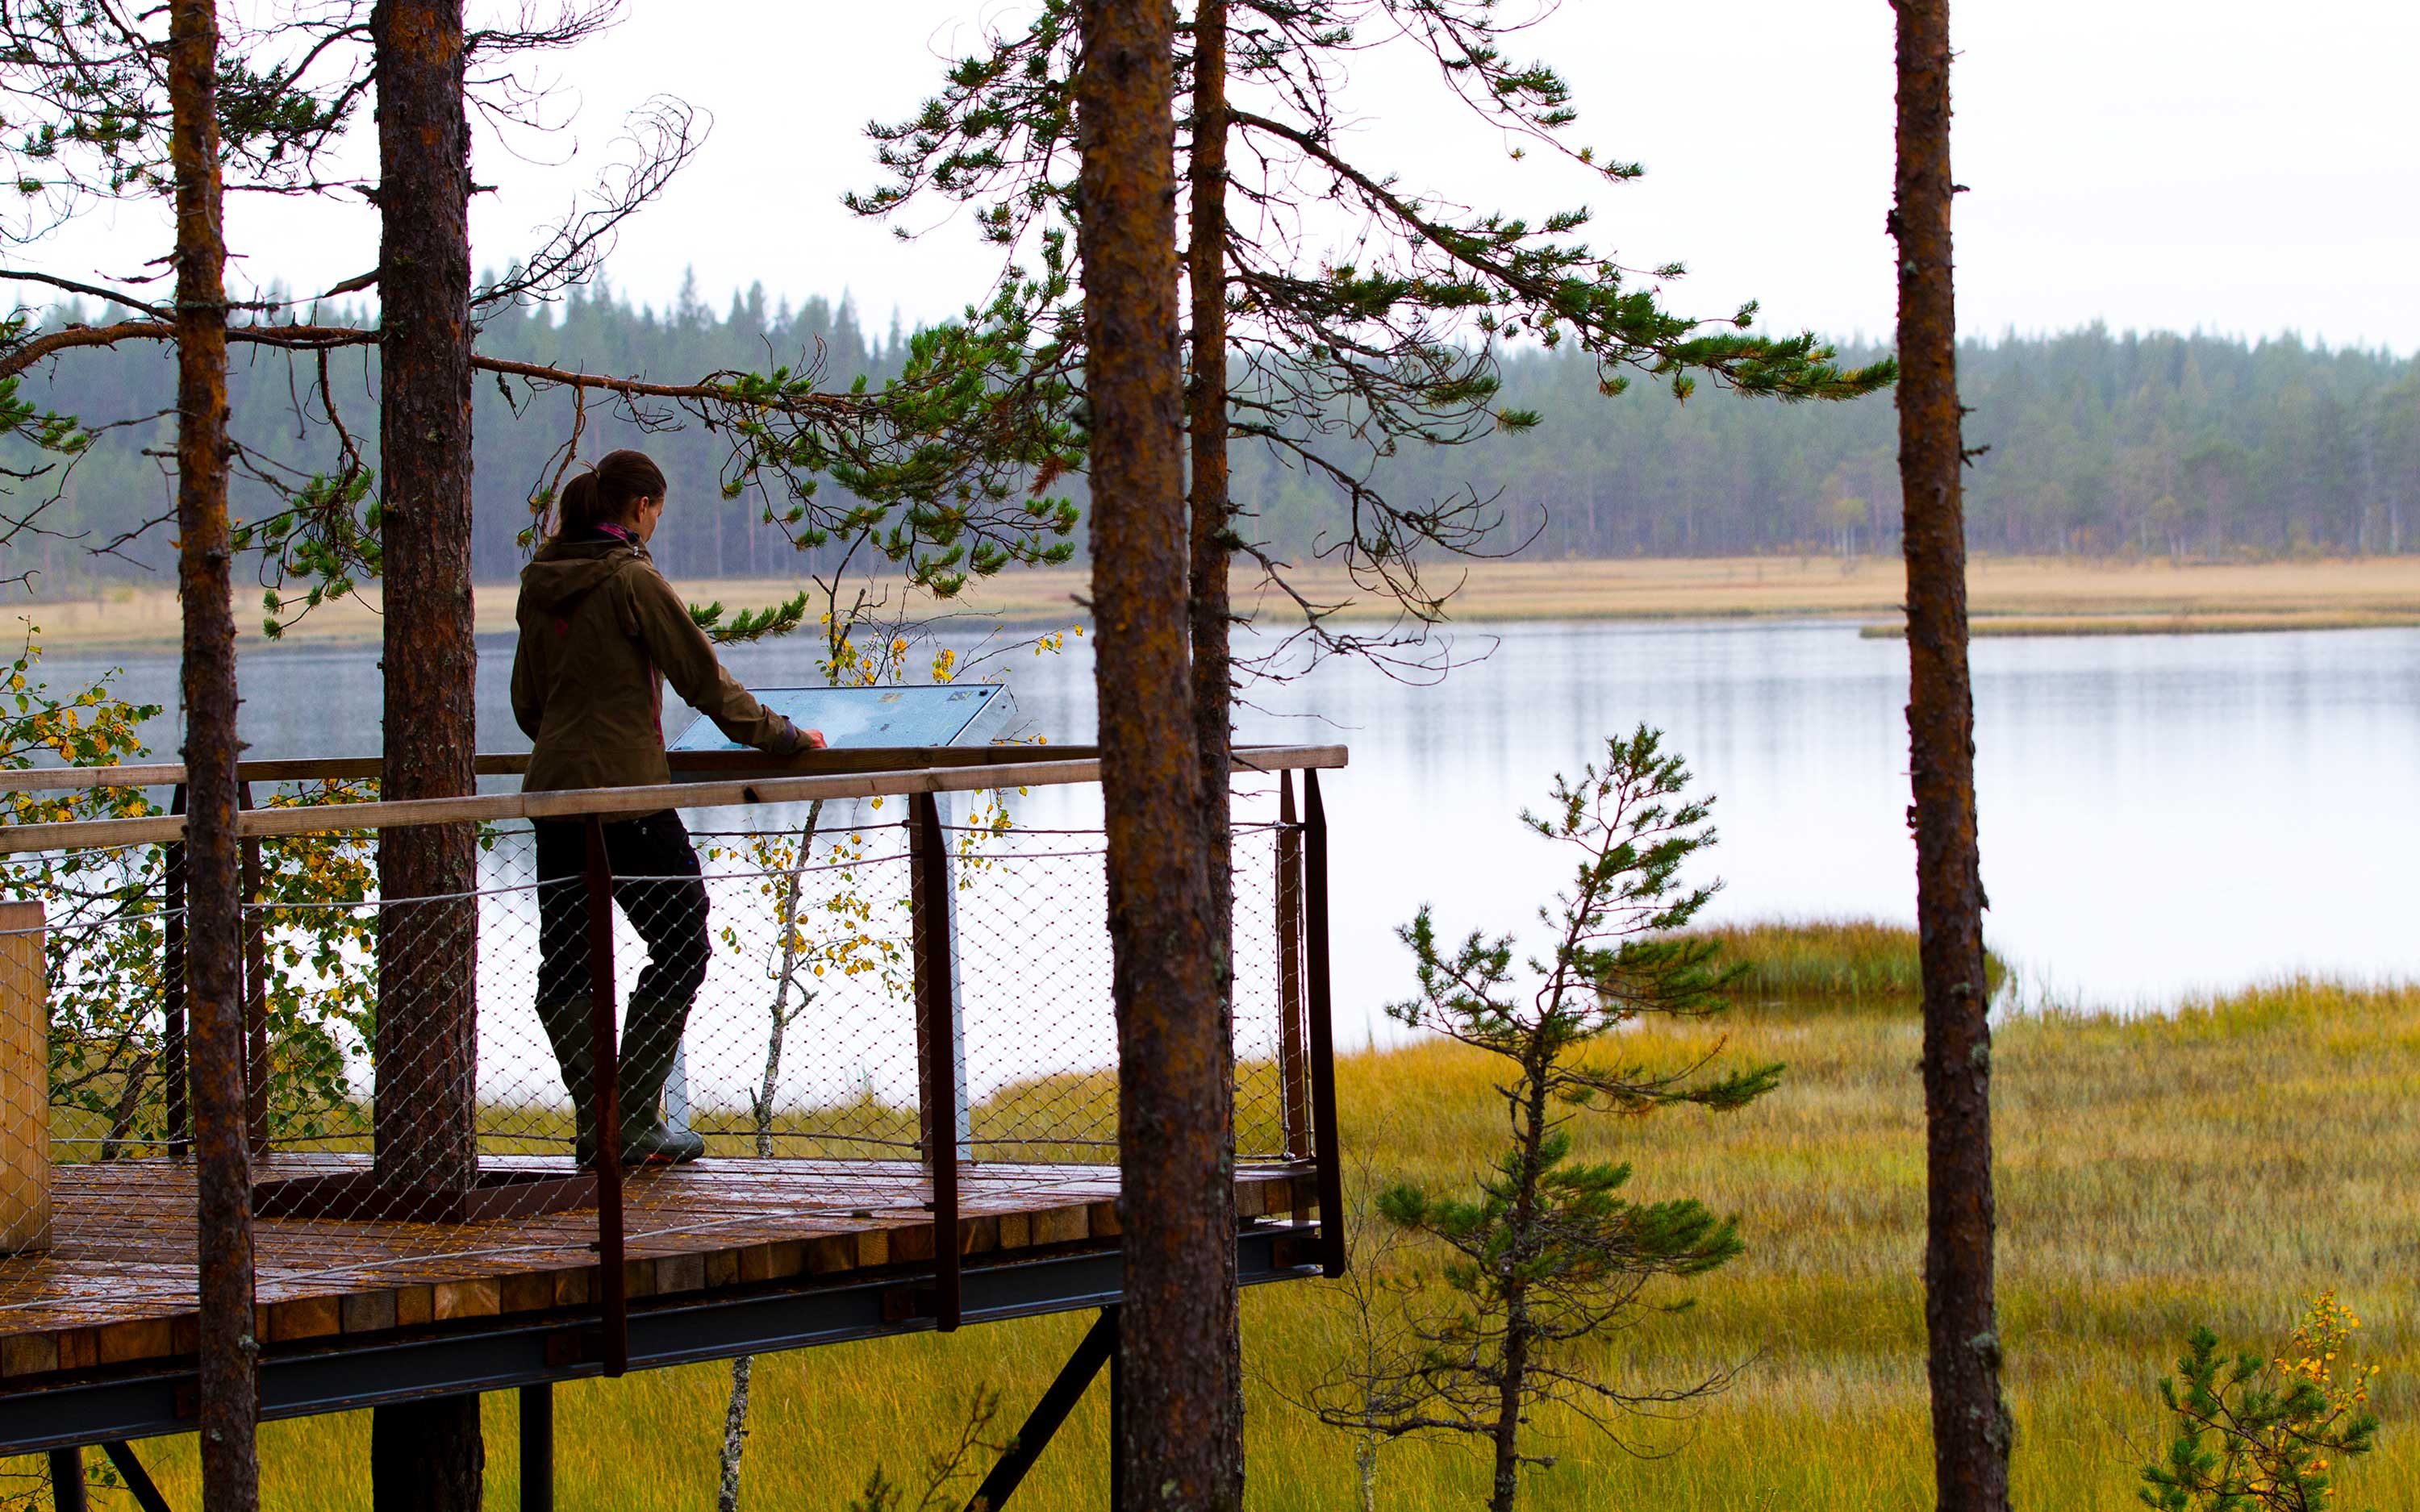 A woman stands at a lookout point and looks out over Swan lake.